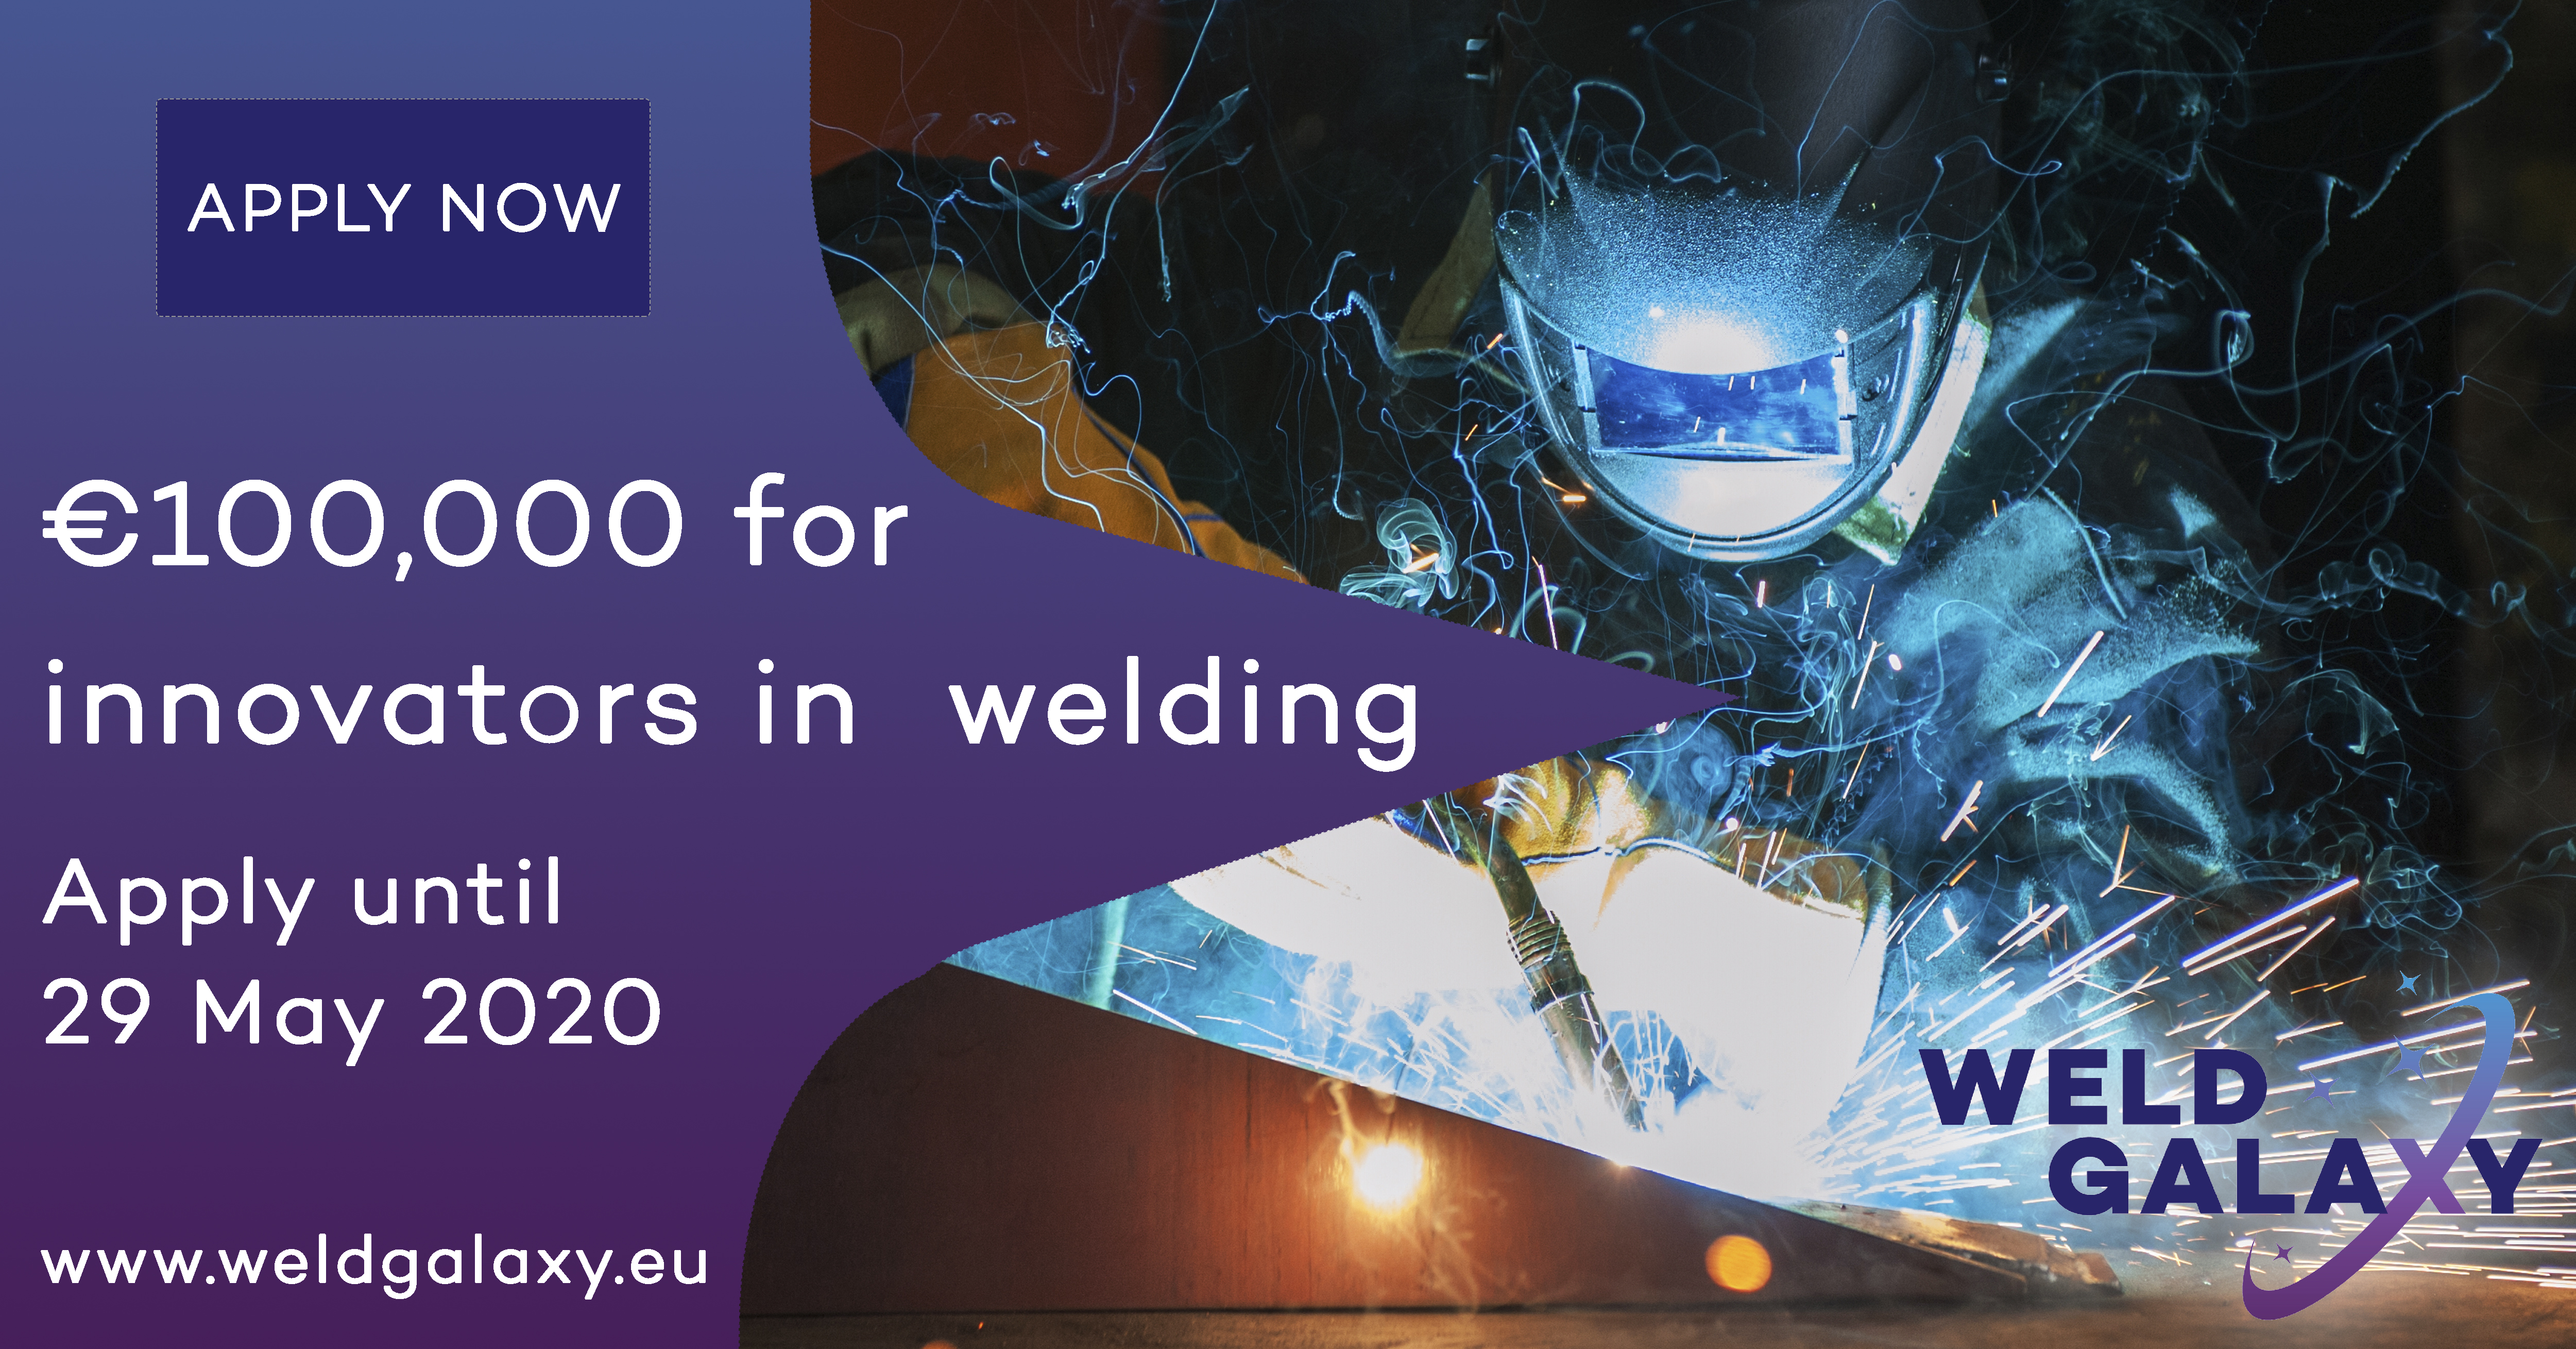 Seeking innovative proposals in the arc welding processes